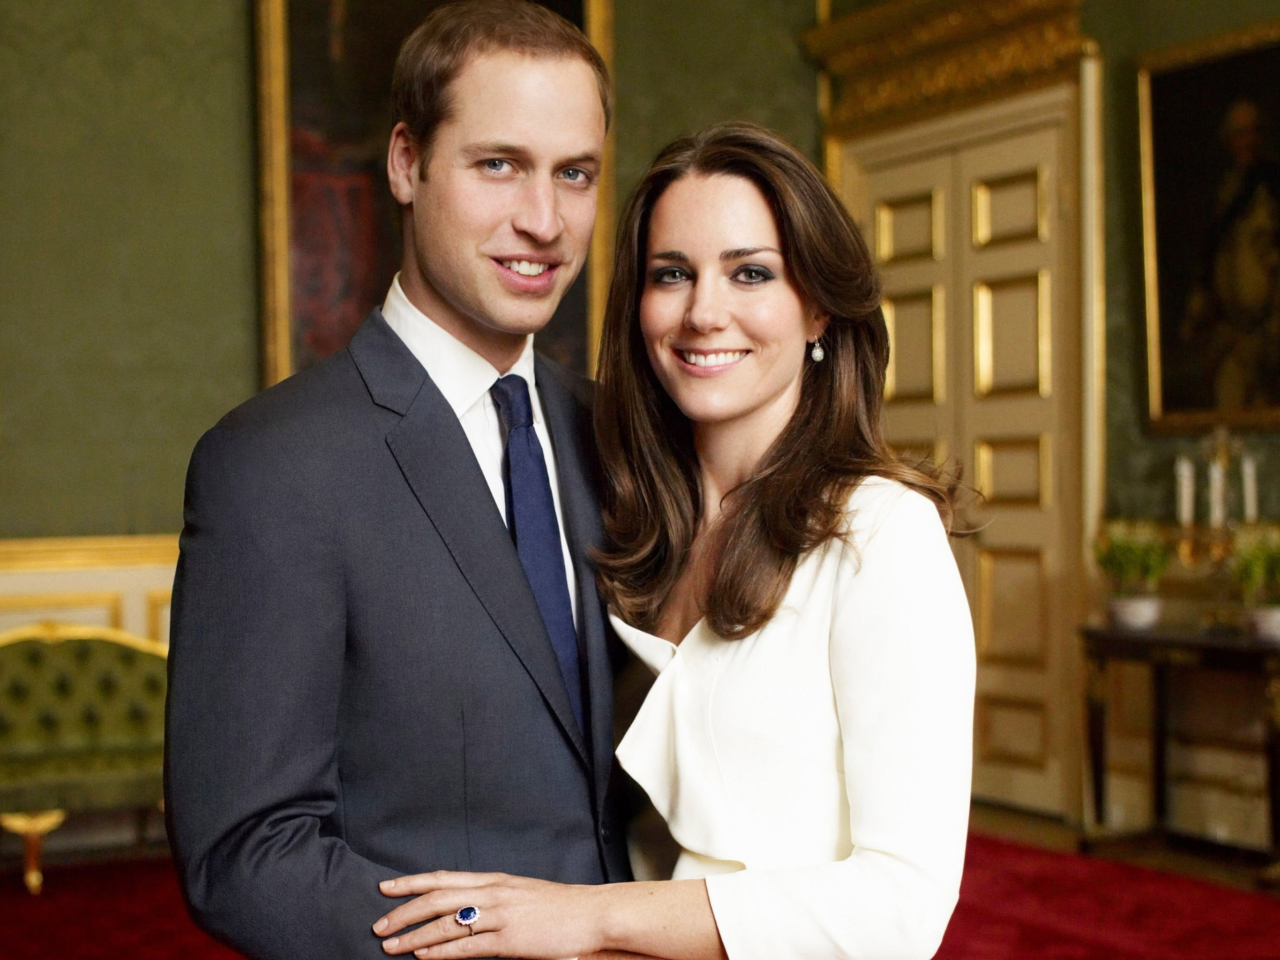 Prince William And Kate Middleton wallpaper 1280x960